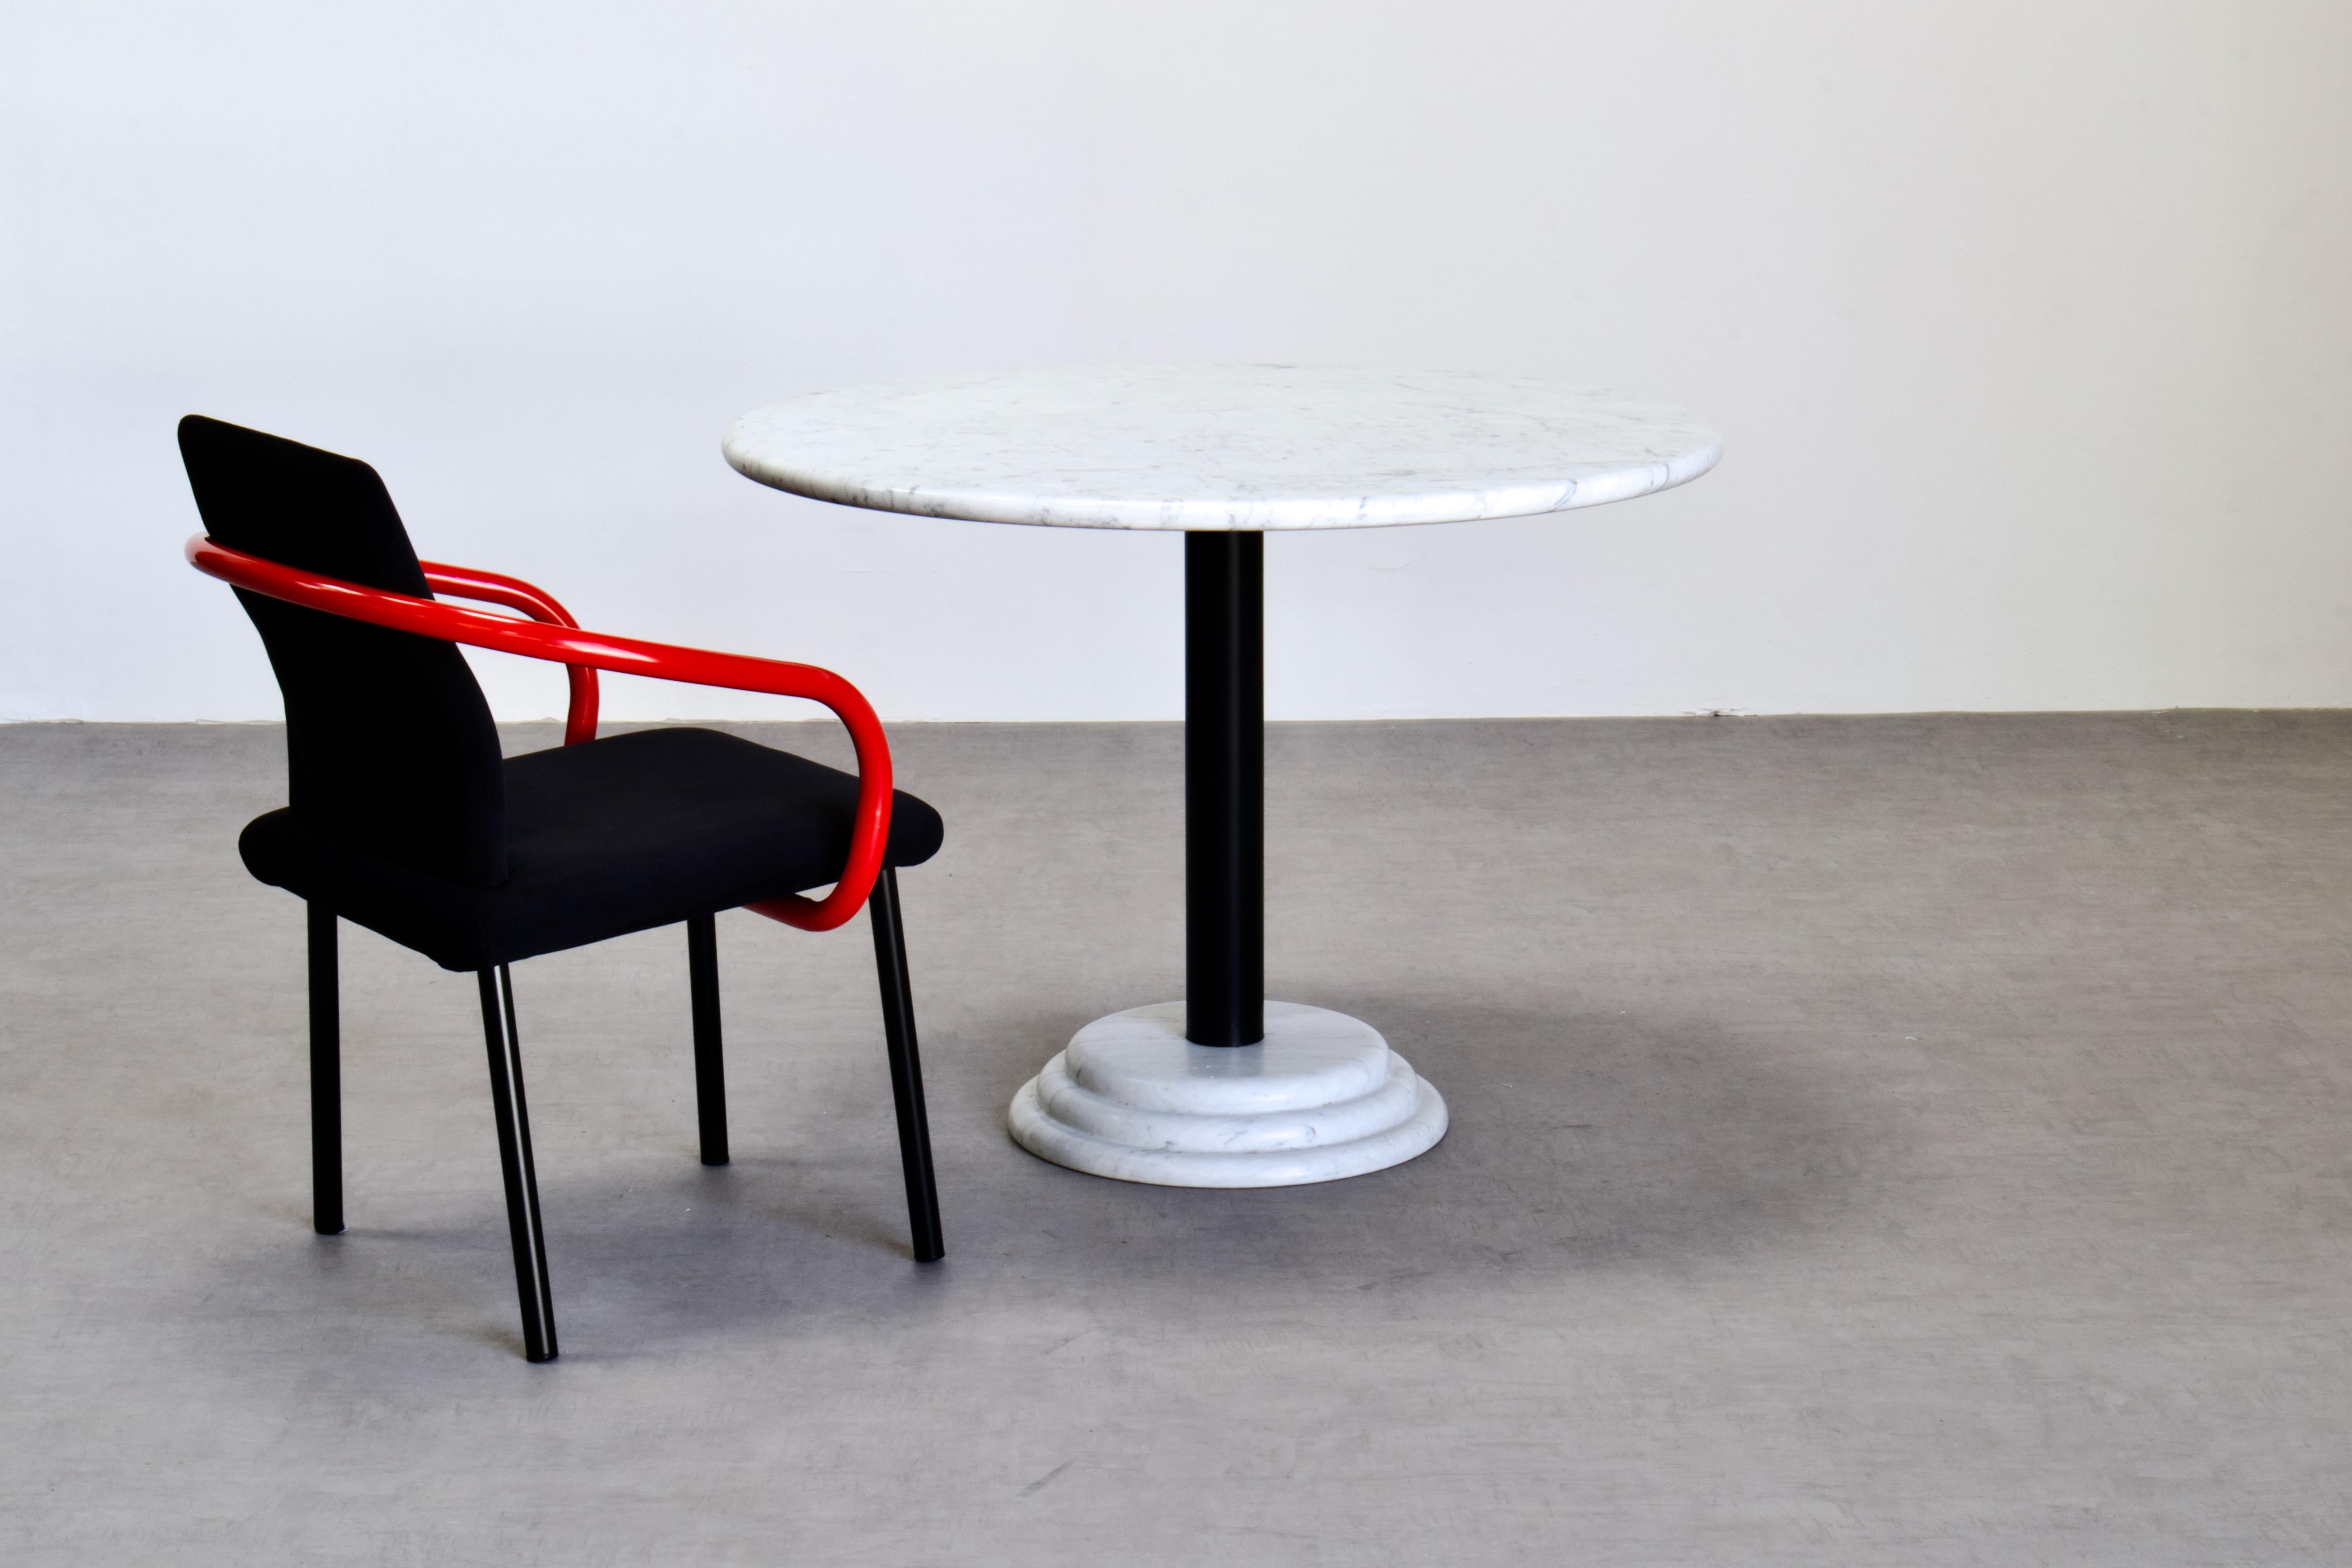 Ettore Sottsass Mandarin Dining Set in Carrara Marble, Red & Black, 1986 Italy In Good Condition For Sale In Grand Cayman, KY